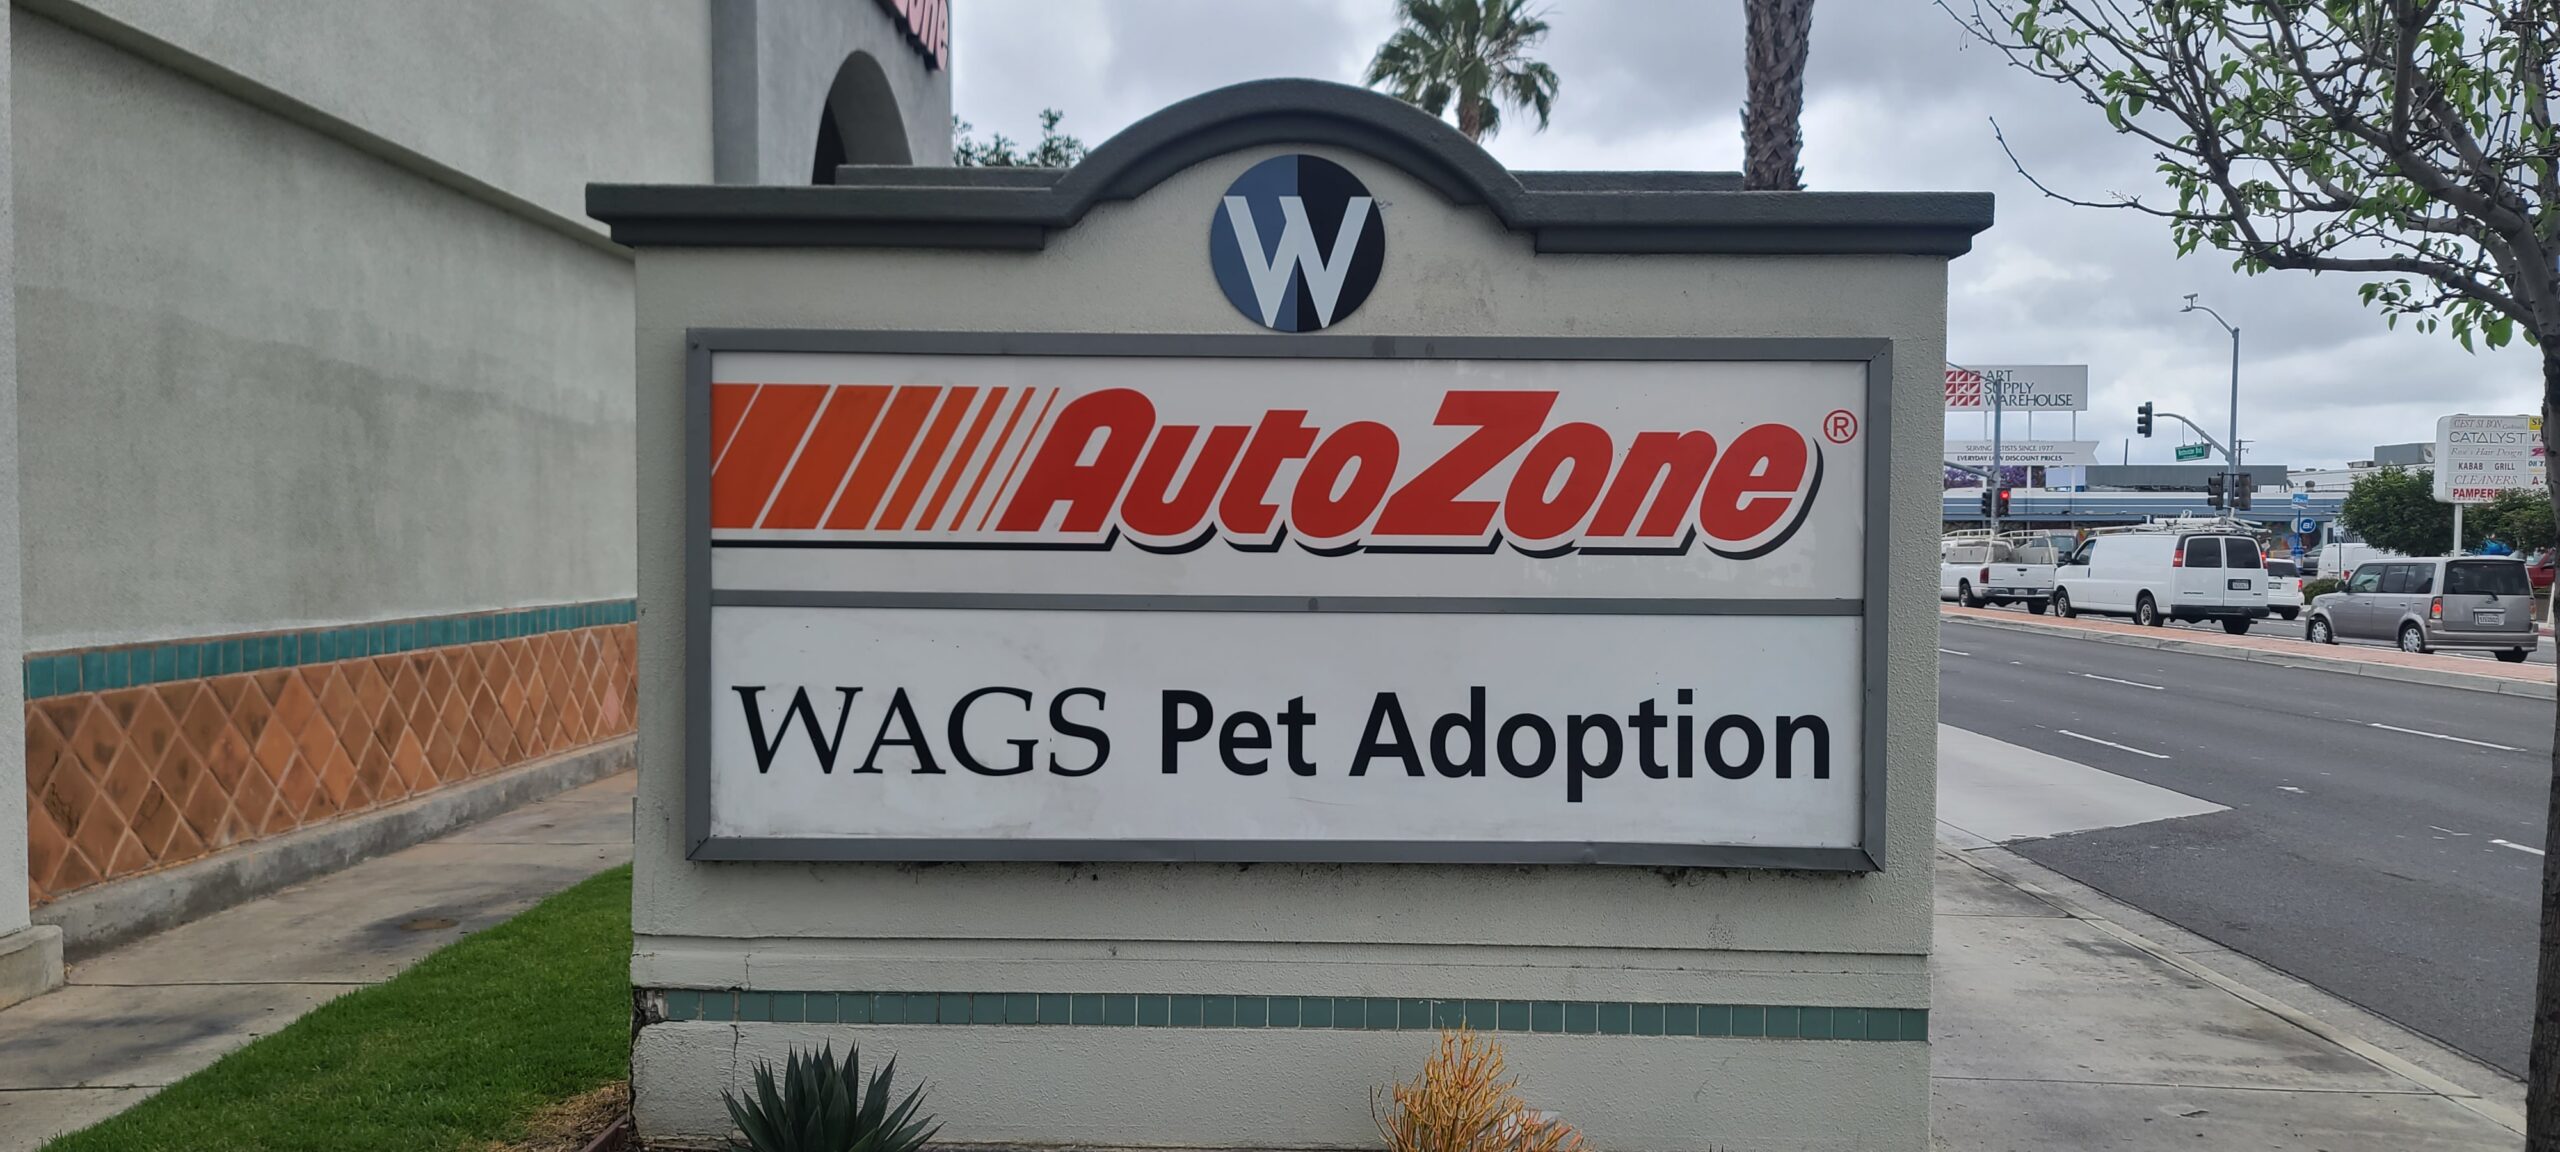 This Lexan monument sign insert will help Westminster Adoption Group and Services reach more people interested in pet shelter and pet adoption services.